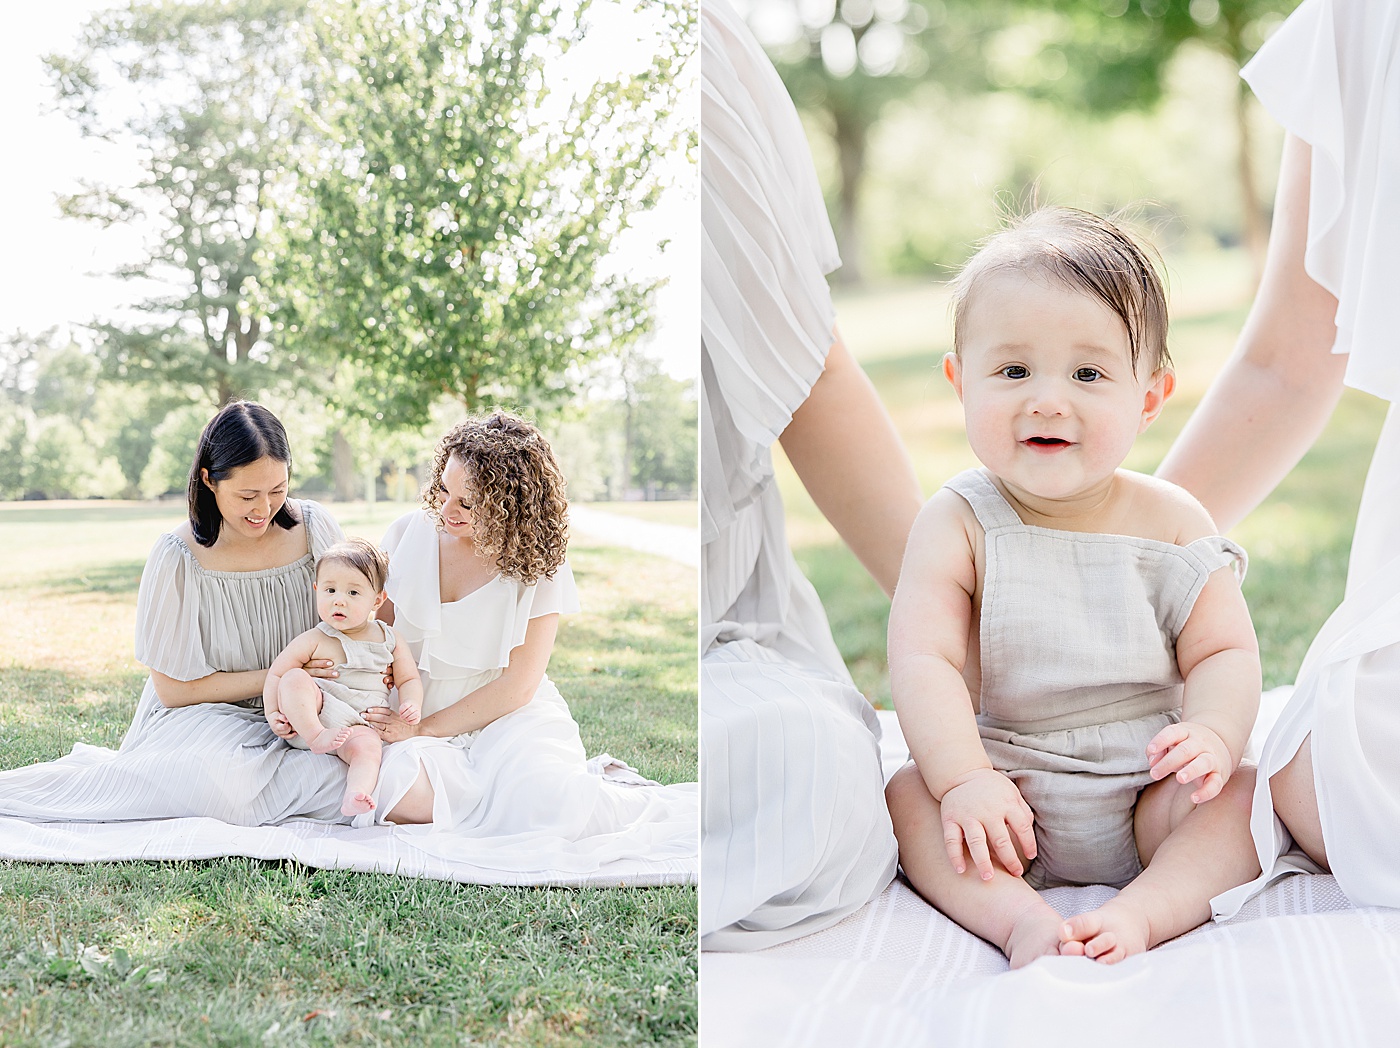 Outdoor family photos at Waveny Park in New Canaan, CT | Kristin Wood Photography